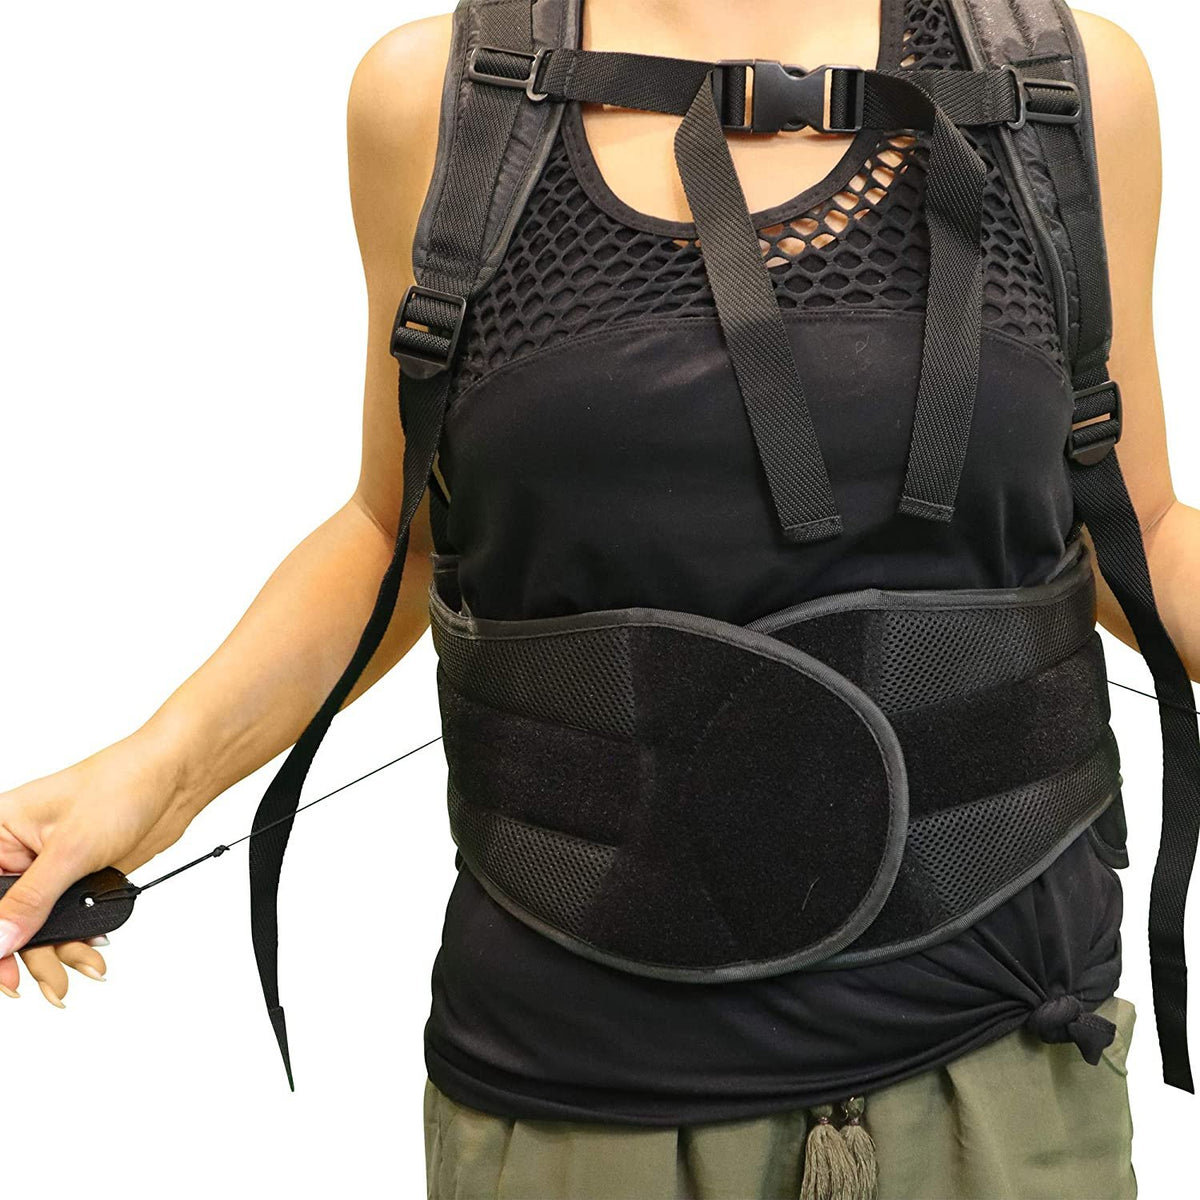 Mars Wellness TLSO Medical Back Brace - PDAC L0456 L0457 - Thoracic Back Brace - Pain Relief Straightener for DDD, Spinal Trauma, Osteoprosis, Fractures, Post Op - Mars Med Supply